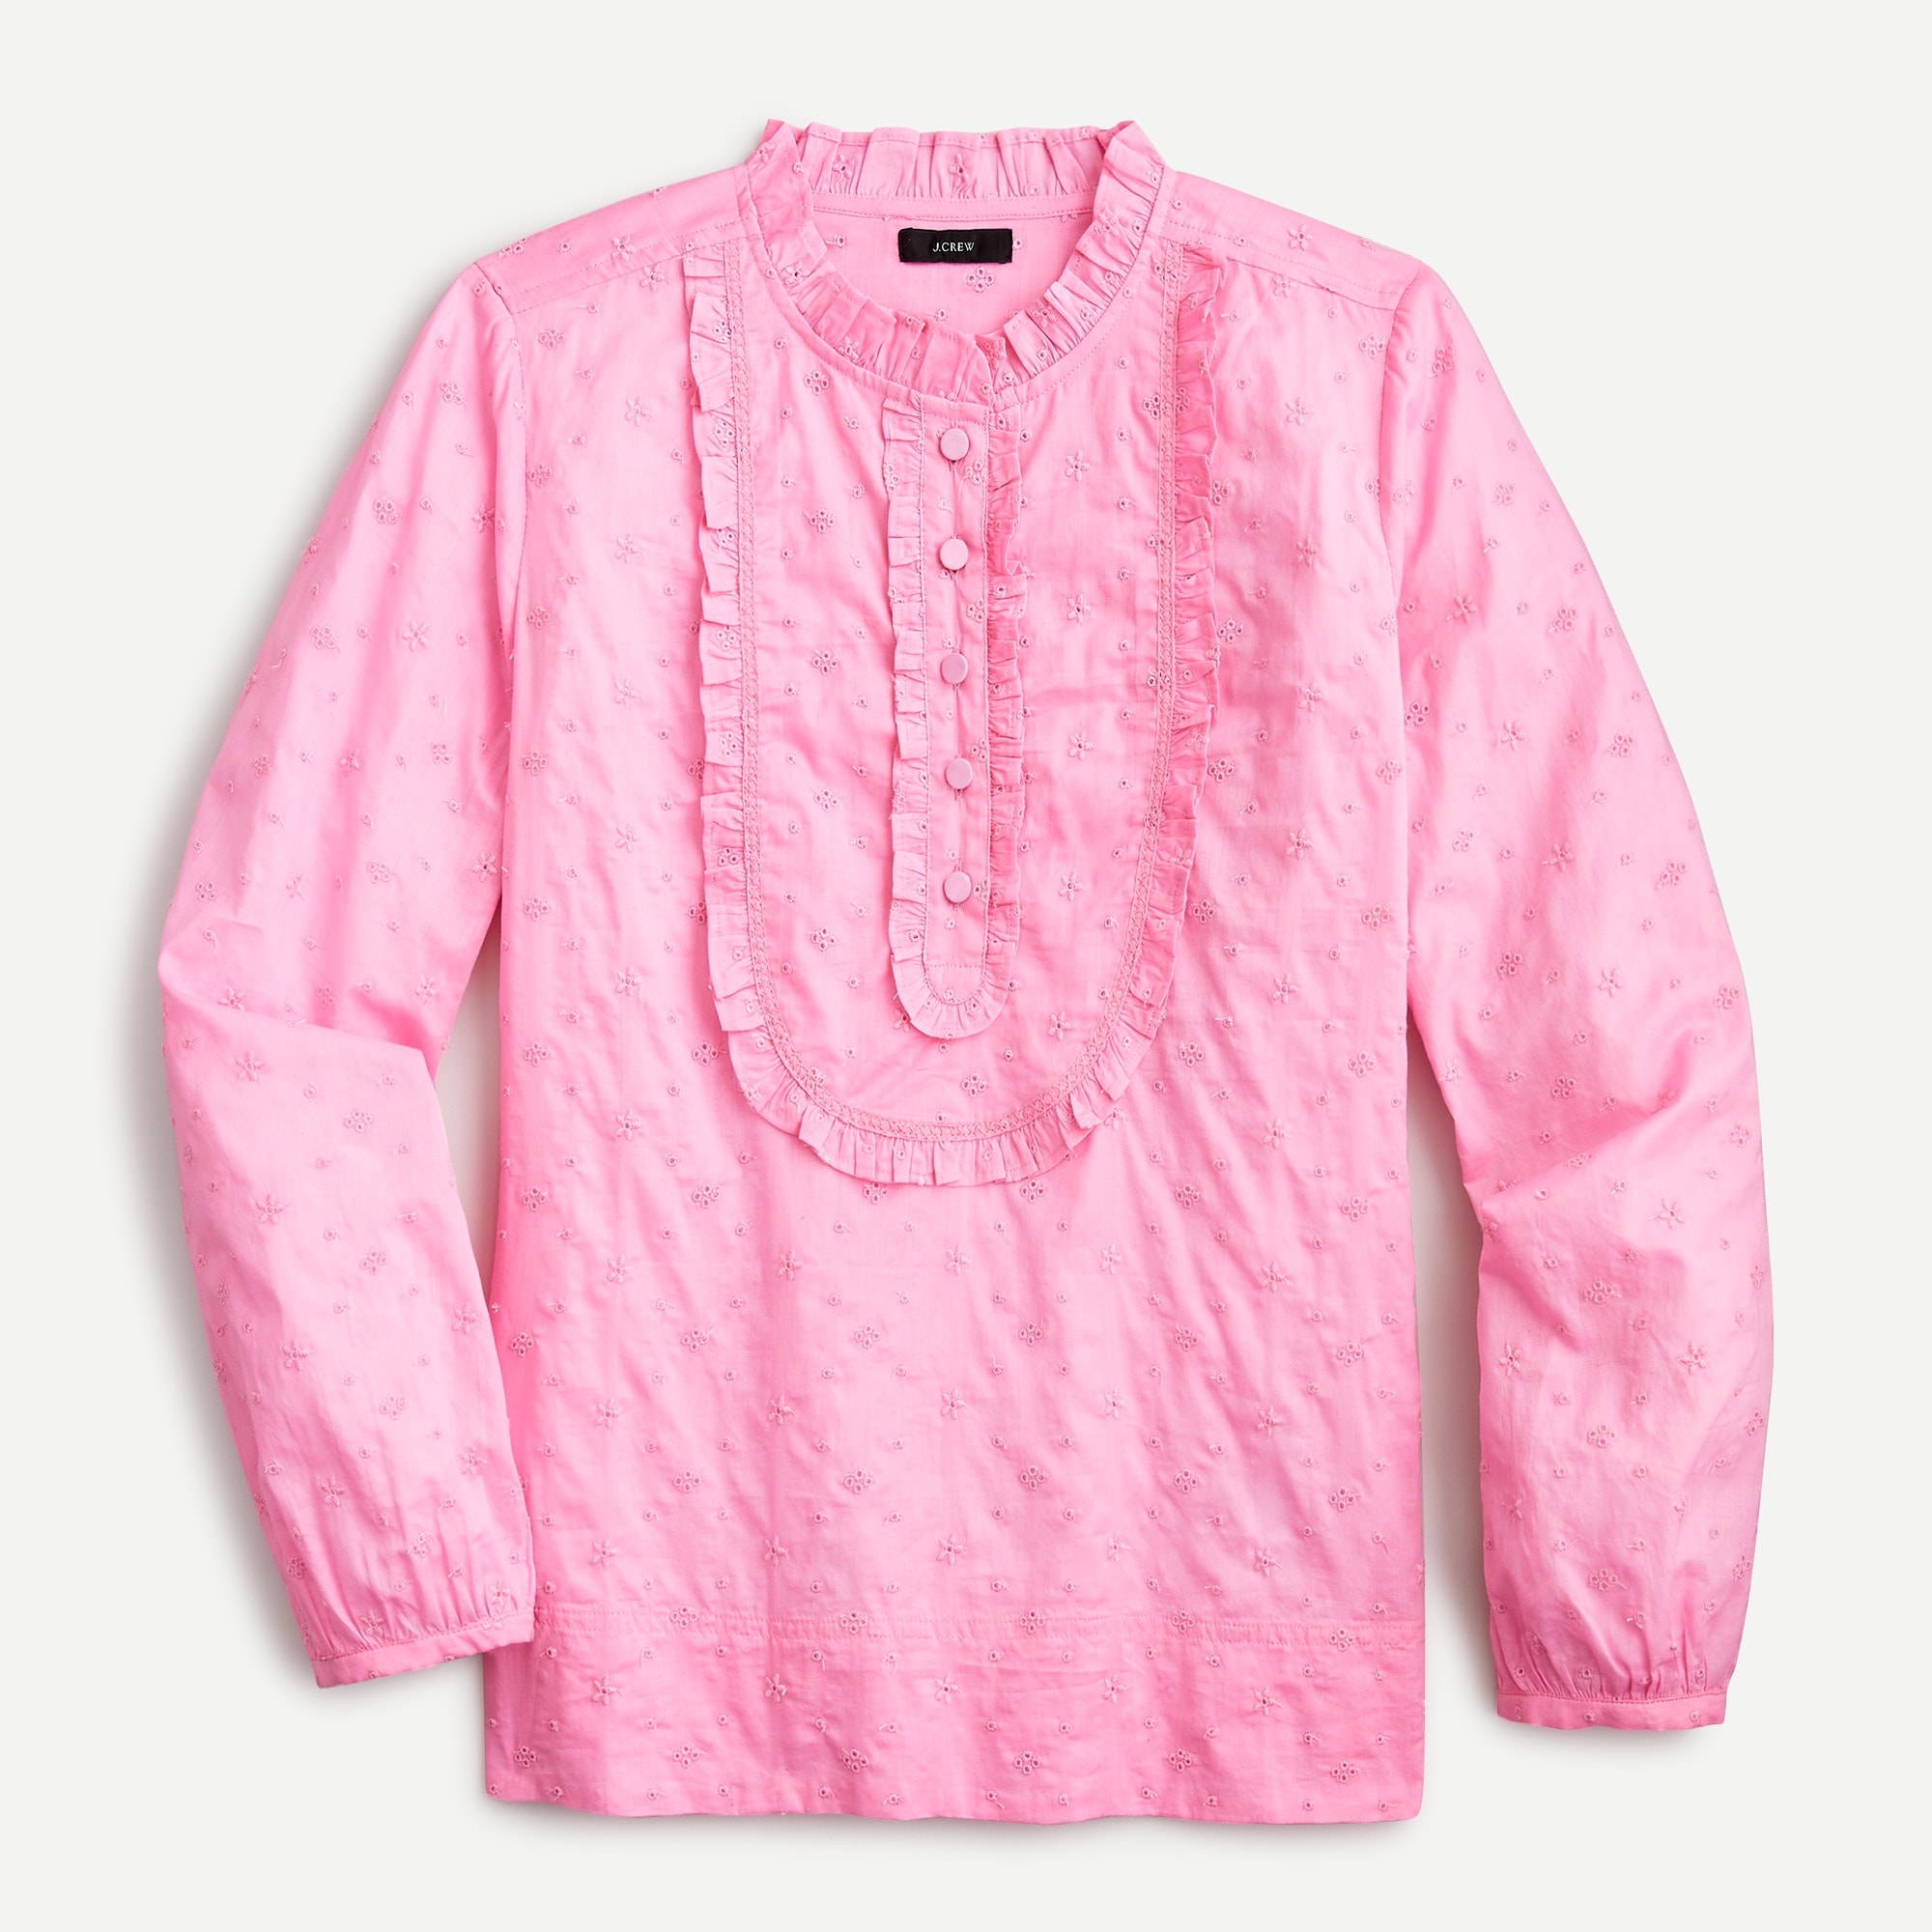 Long-sleeve Ruffle Shirt In Floral Eyelet For Women